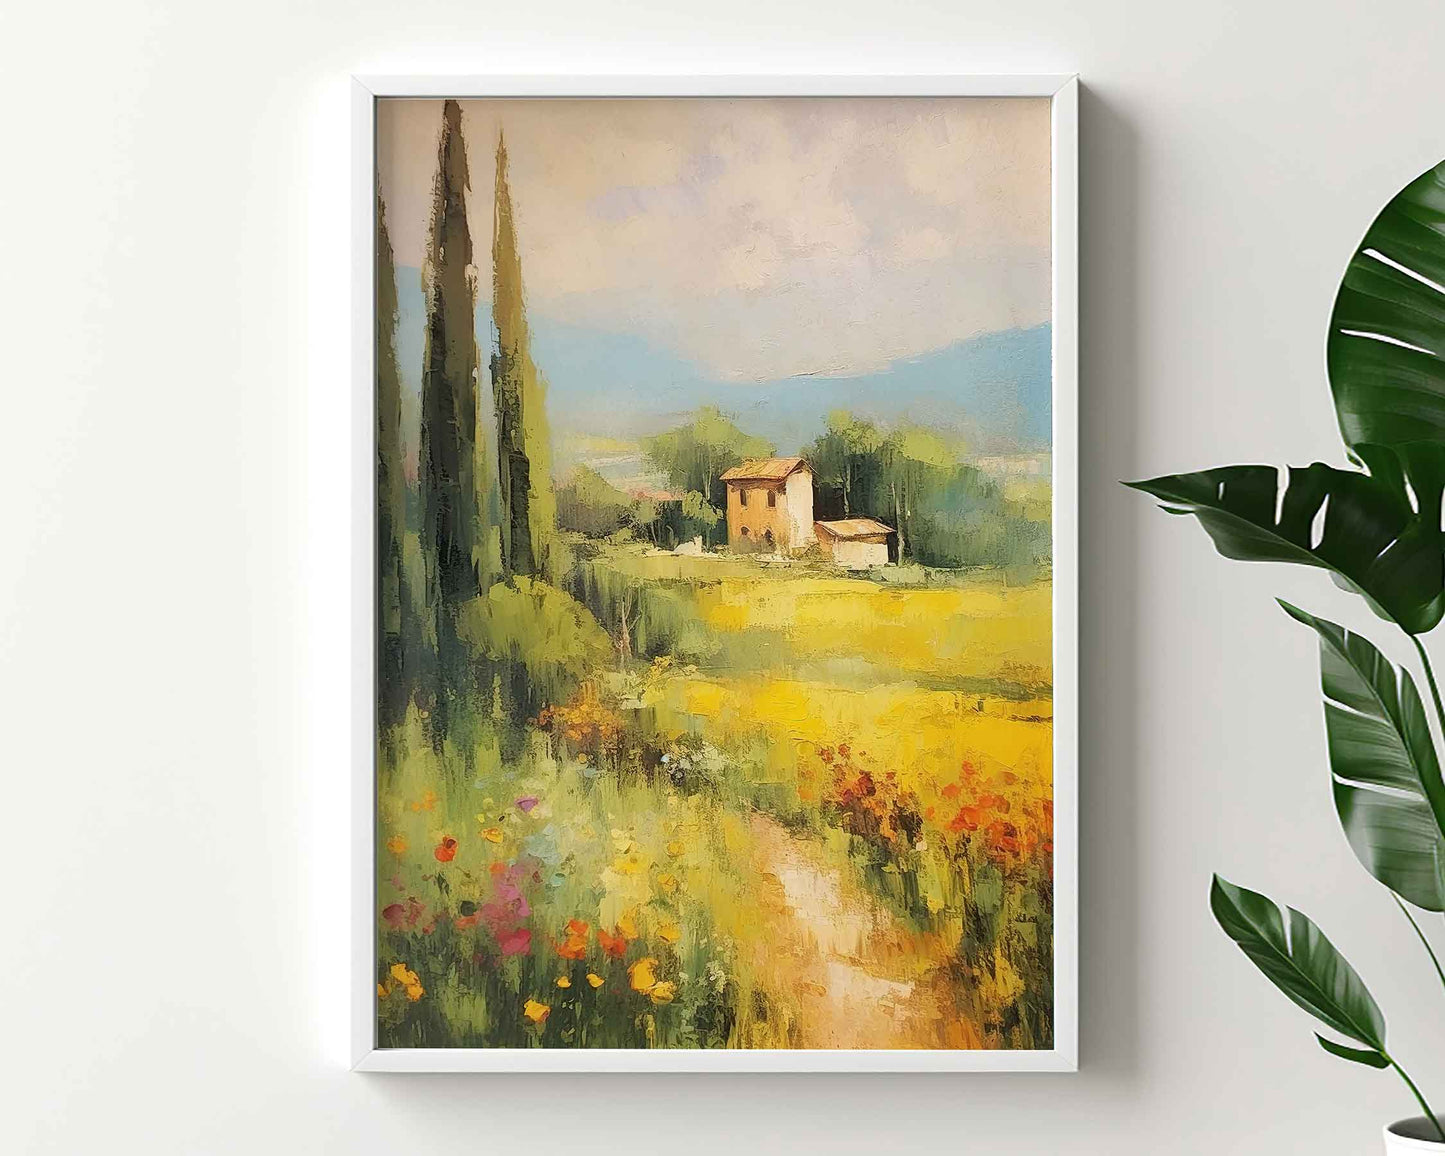 Framed Image of Italian Scenic Travel & Lifestyle Landscapes of Italy Wall Art Prints